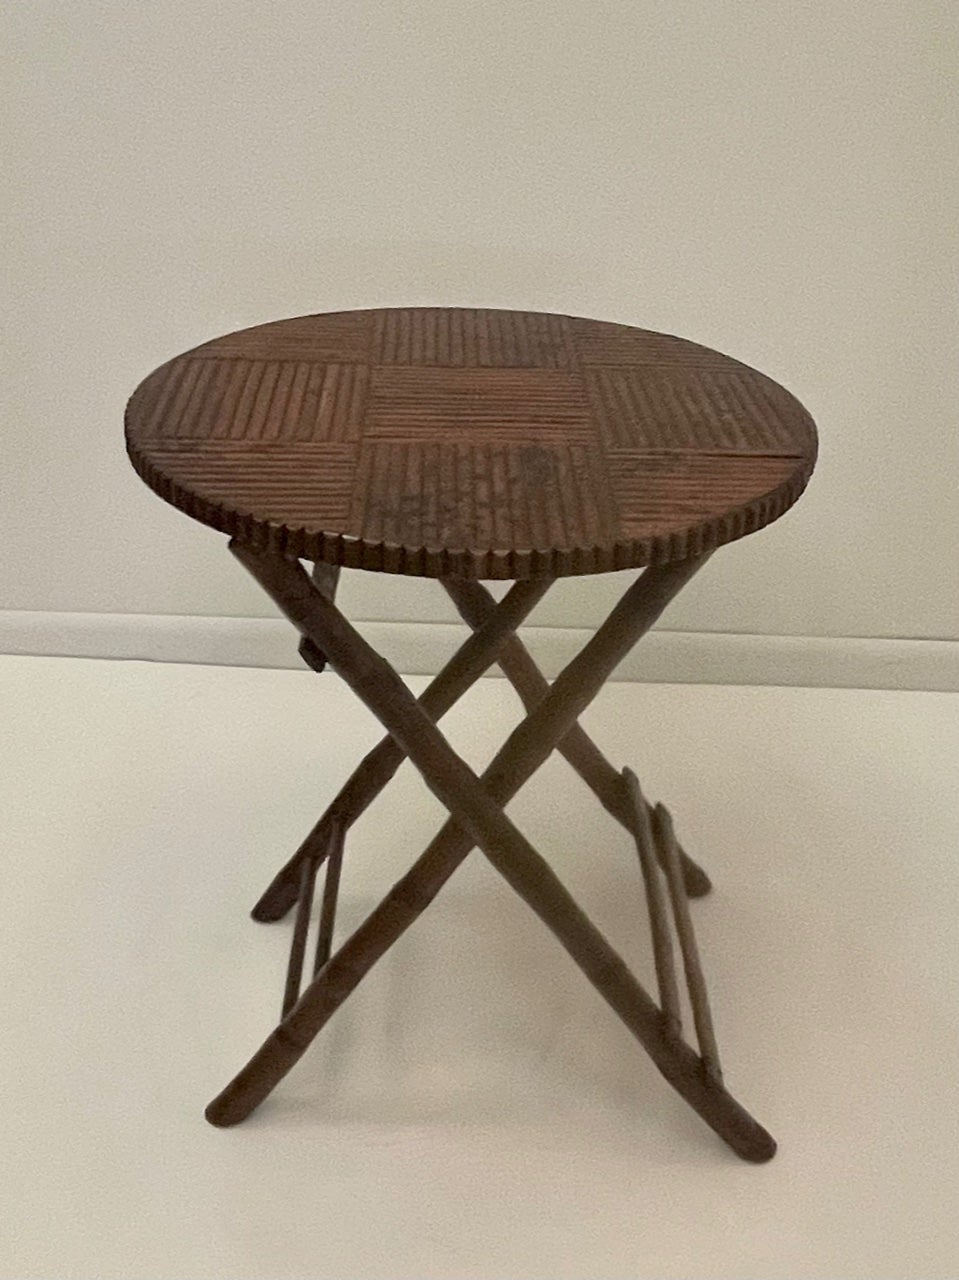 A great looking versatile folding bamboo round side table having handsome geometric design on top and a honey brown warm patina.
Note:  Pair available for $2200